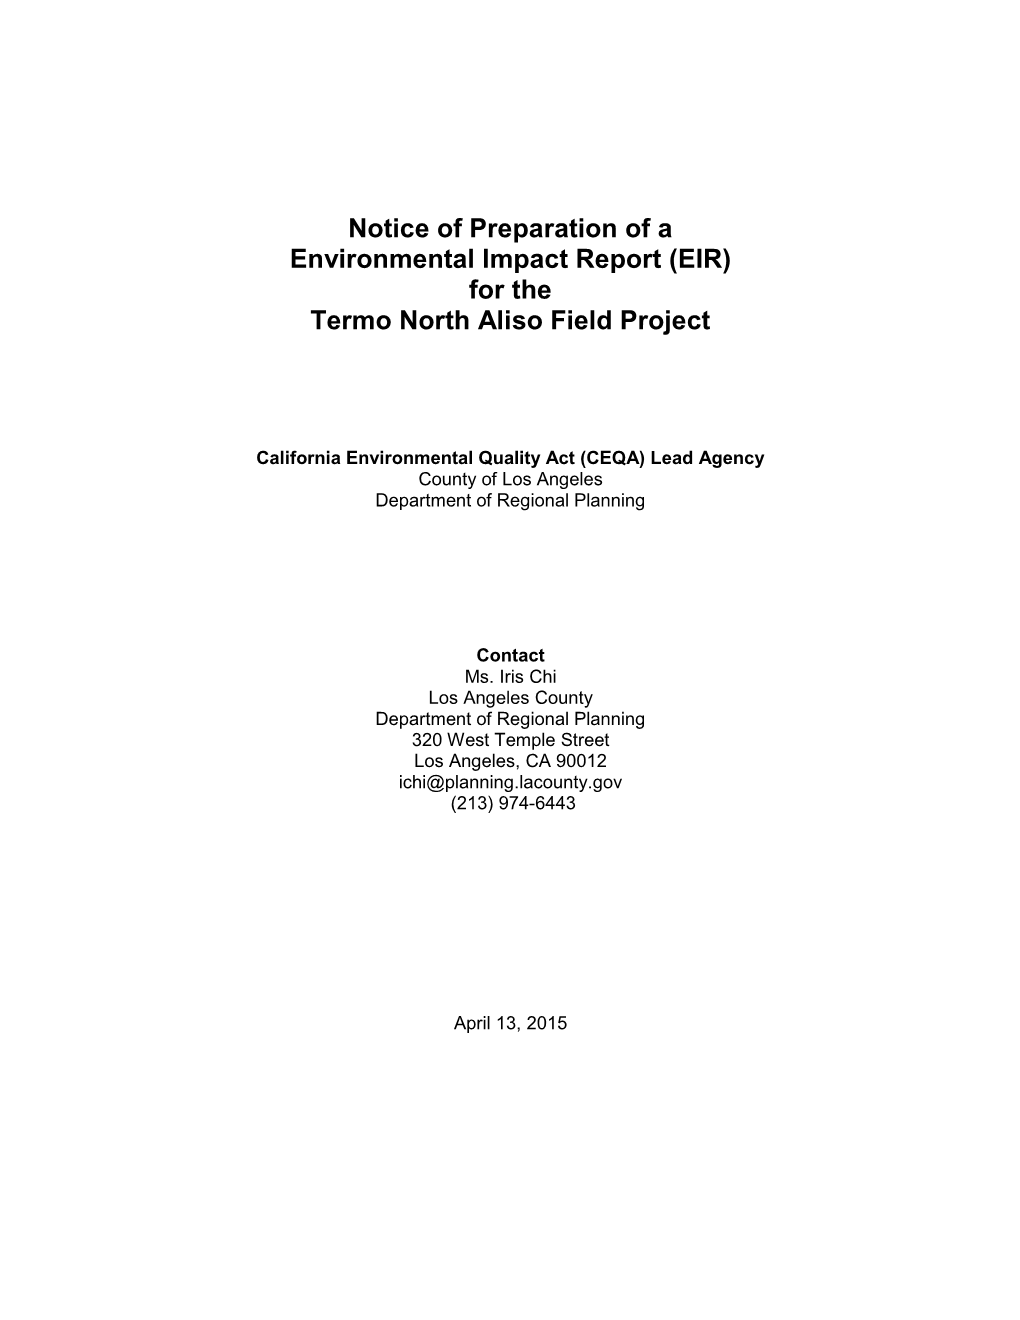 Environmental Impact Report (EIR) for the Termo North Aliso Field Project